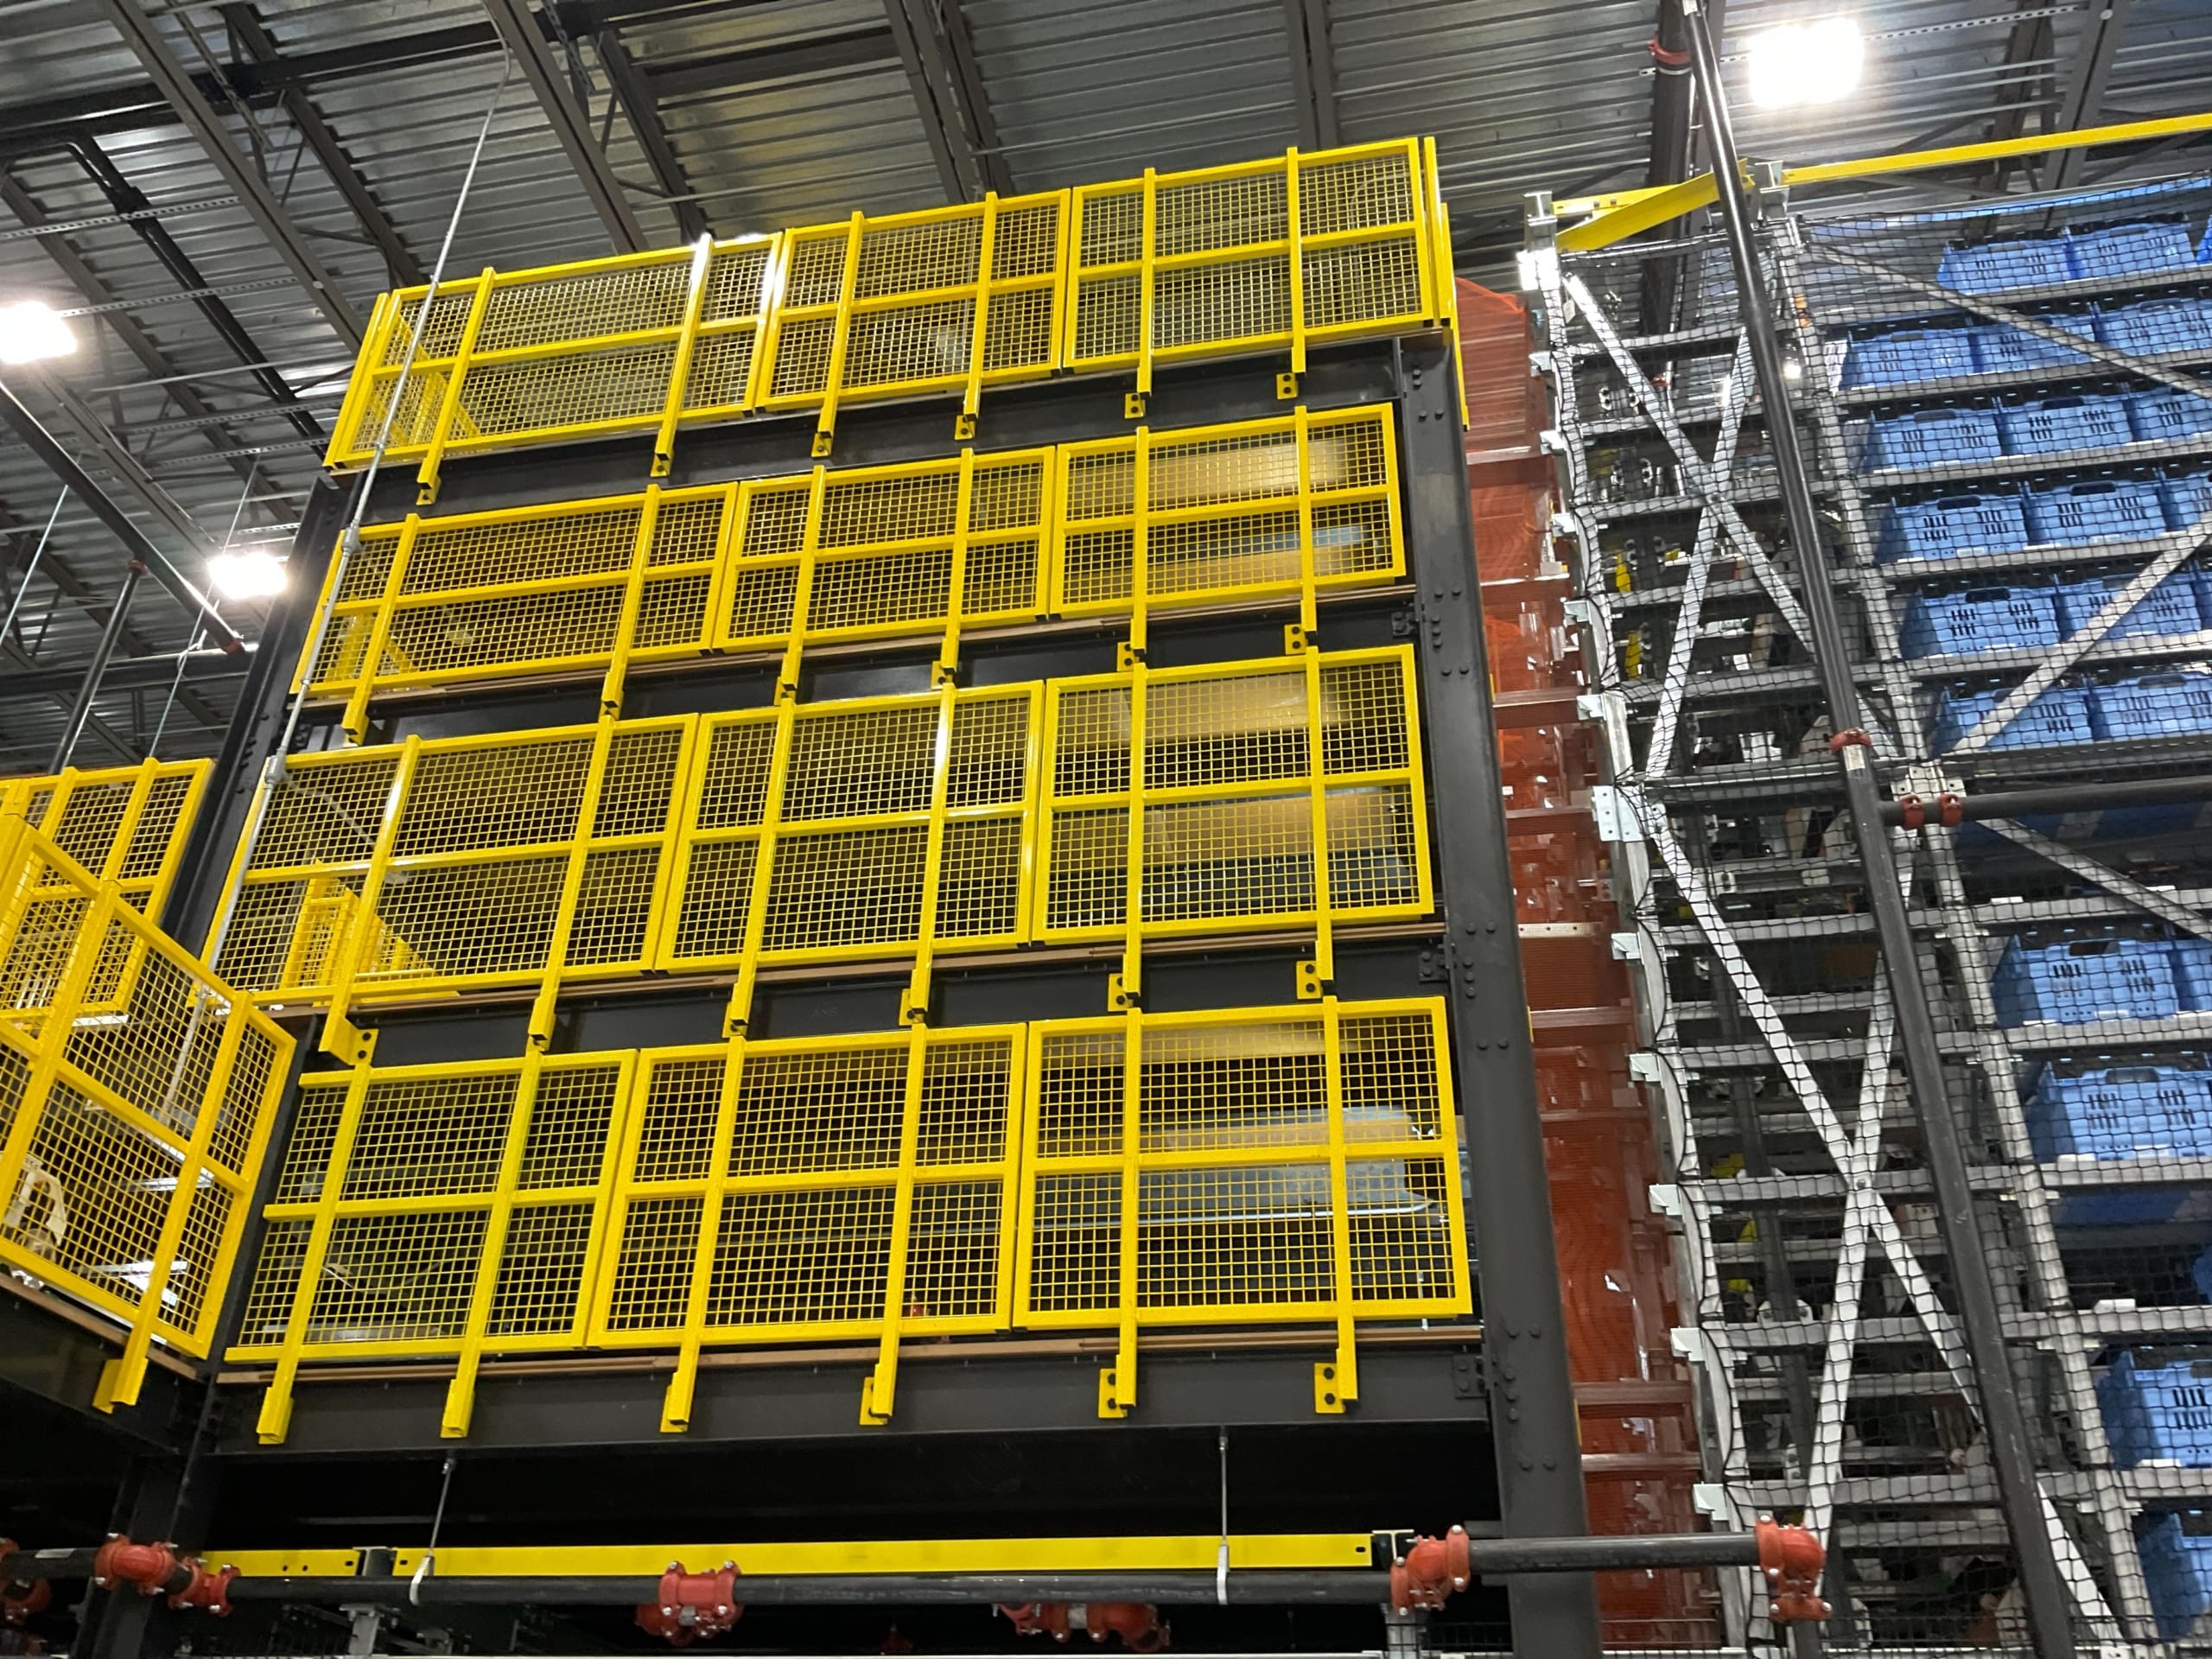 A large warehouse with yellow crates and shelves.